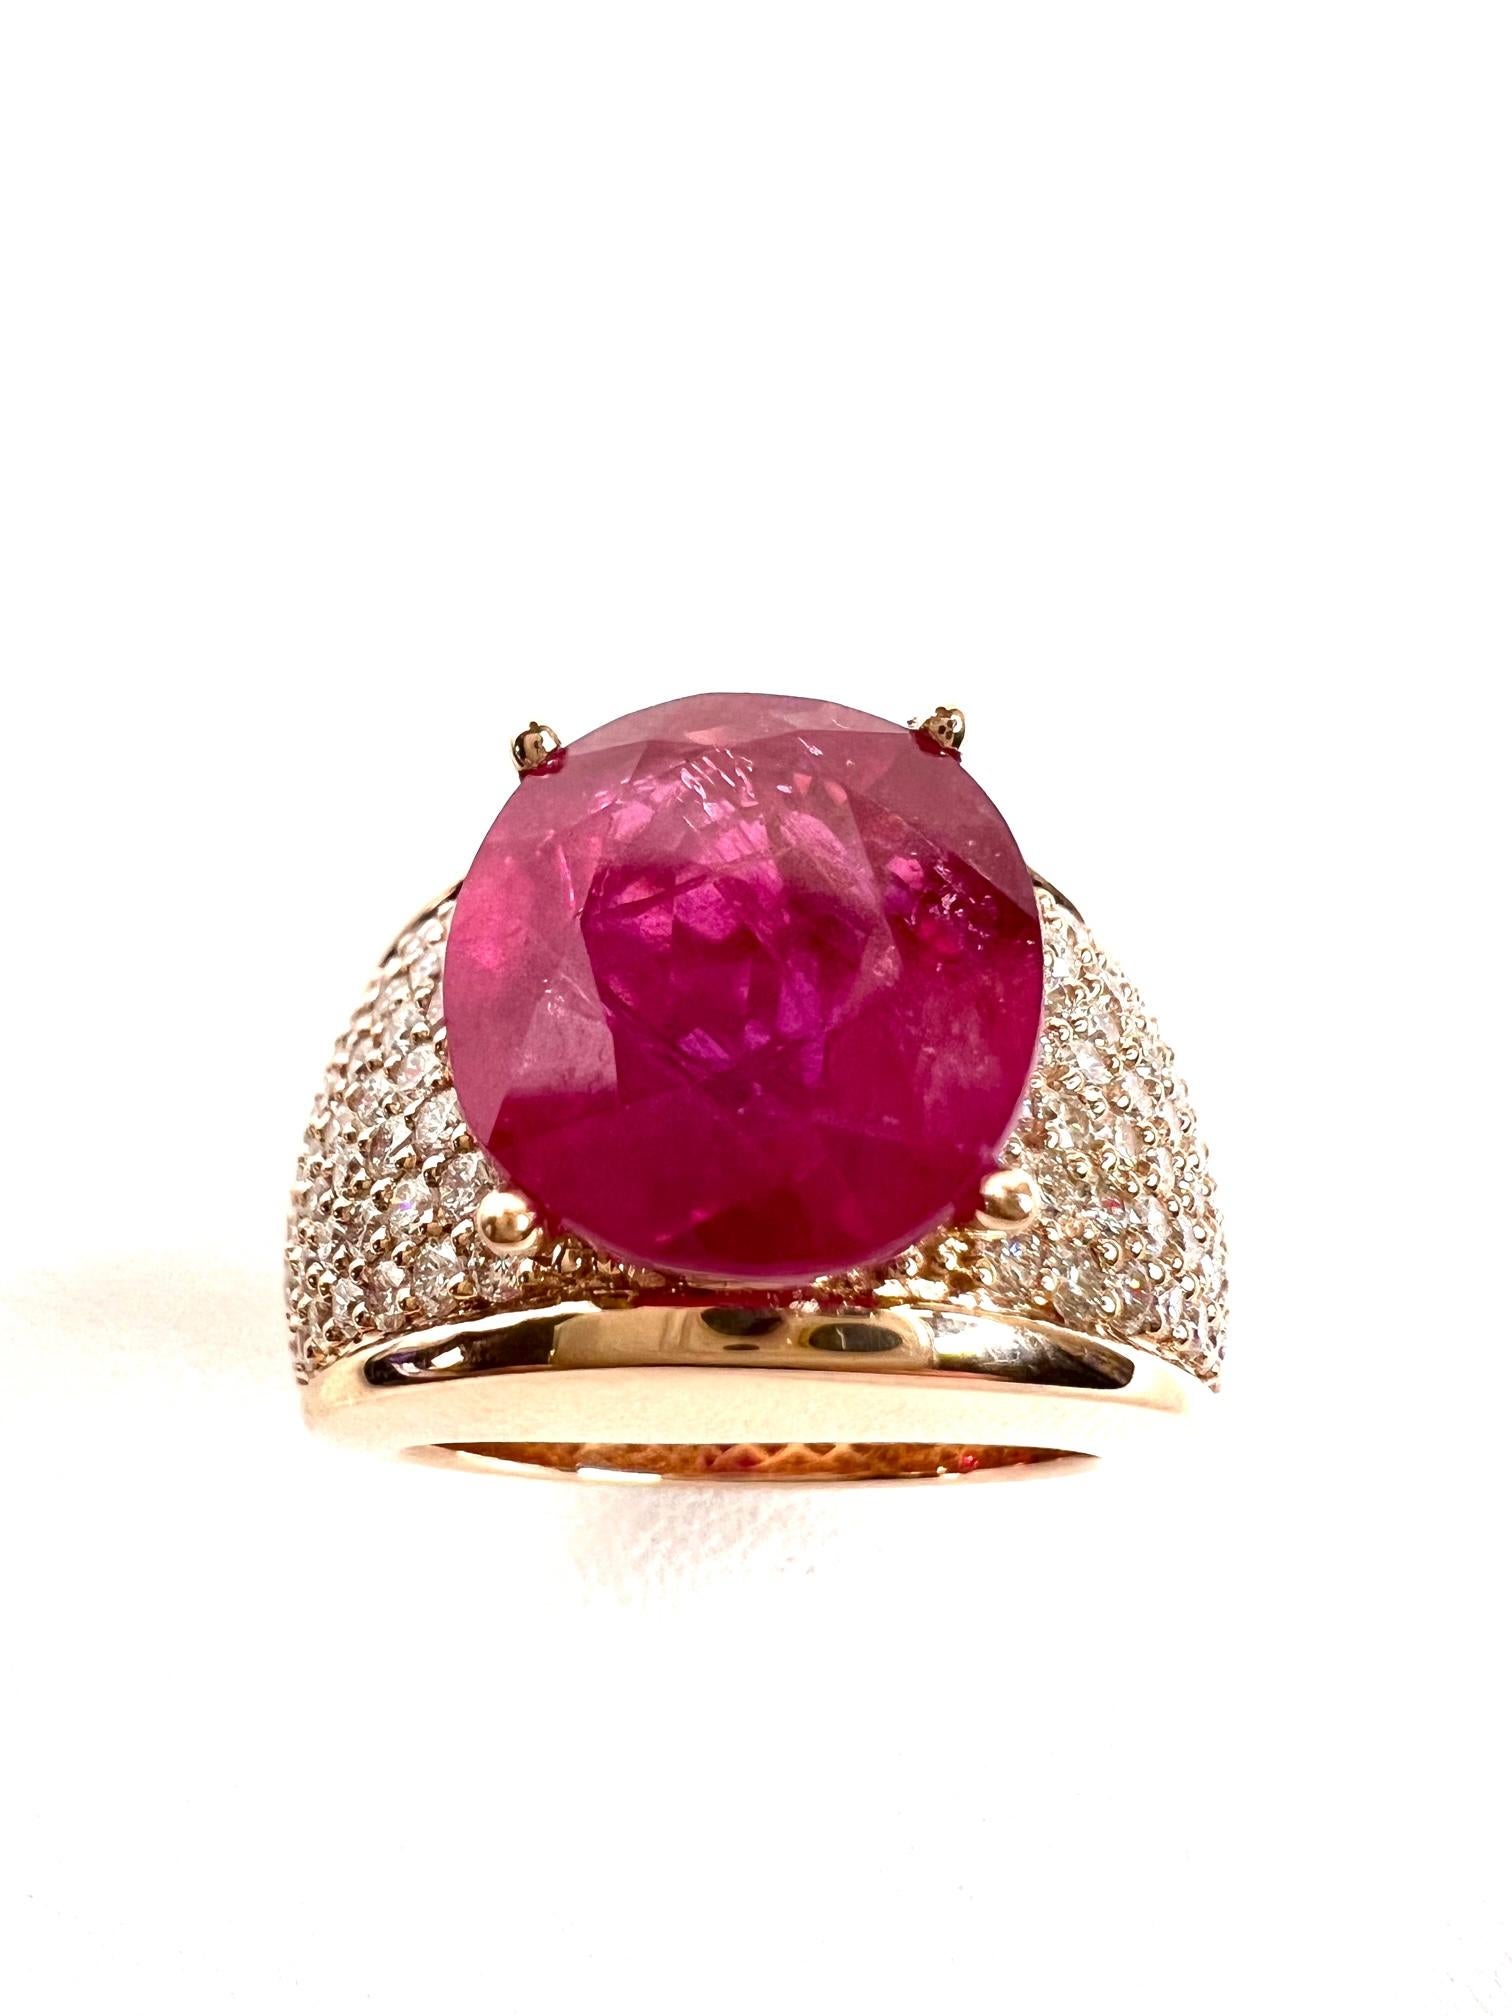 Thomas Leyser is renowned for his contemporary jewellery designs utilizing fine gemstones.

Ring in 18K Red Gold (17,3gr.) with 1x Ruby (cushion shape, 14,1x12,2mm, 10,28cts., clarity improved) + Diamonds (brillant-cut, 2,68cts., I/SI).

Ringsize is